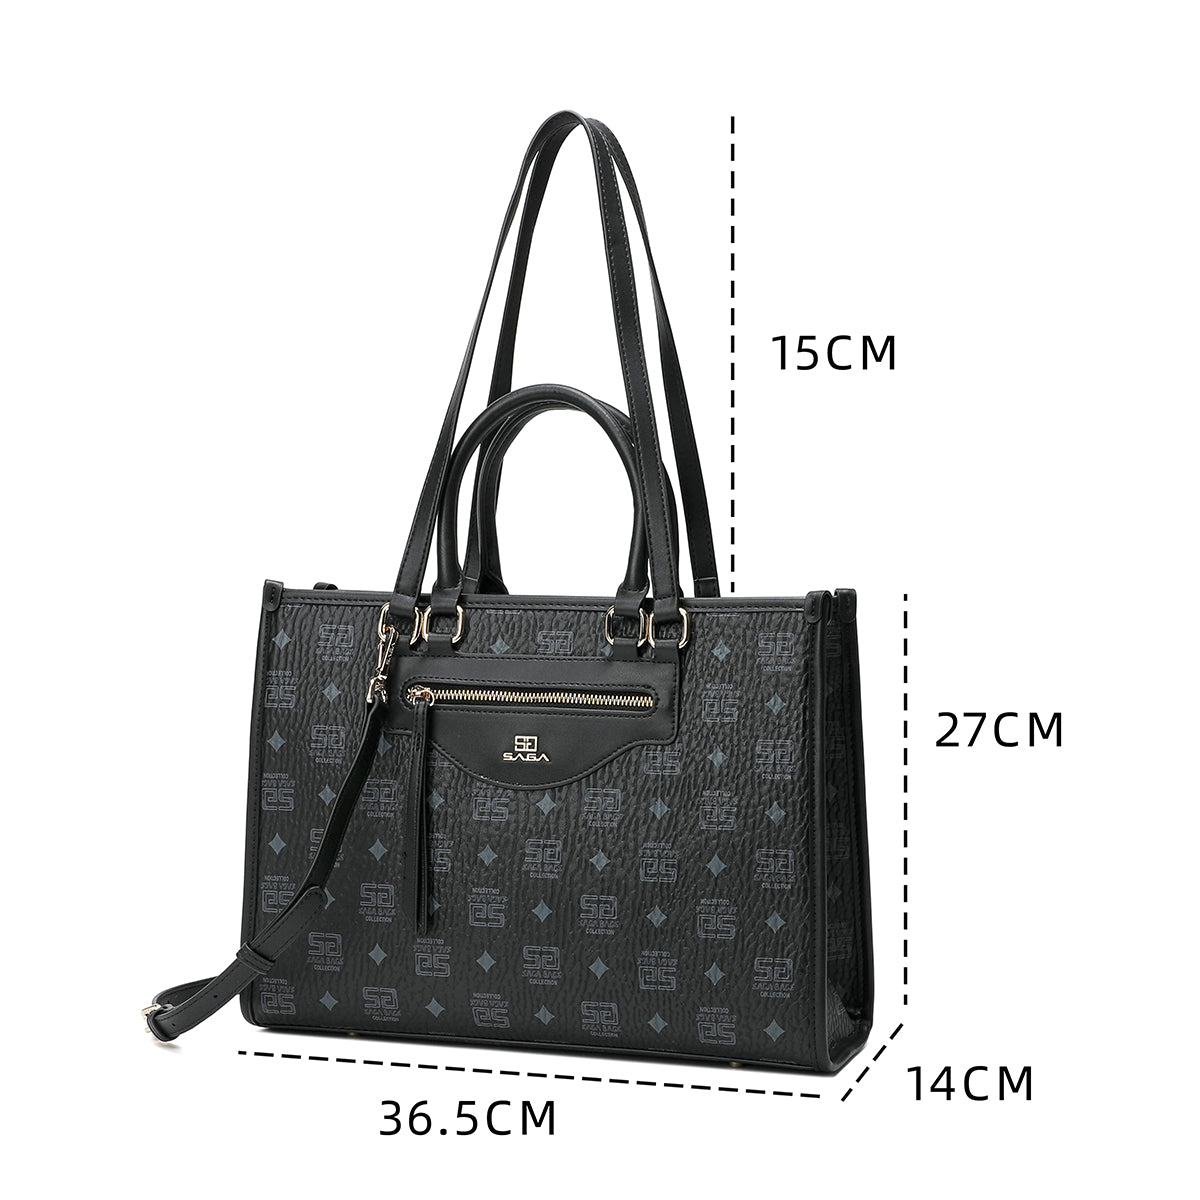 A spacious luxury leather bag with a wonderful design, 36 cm wide, black colour